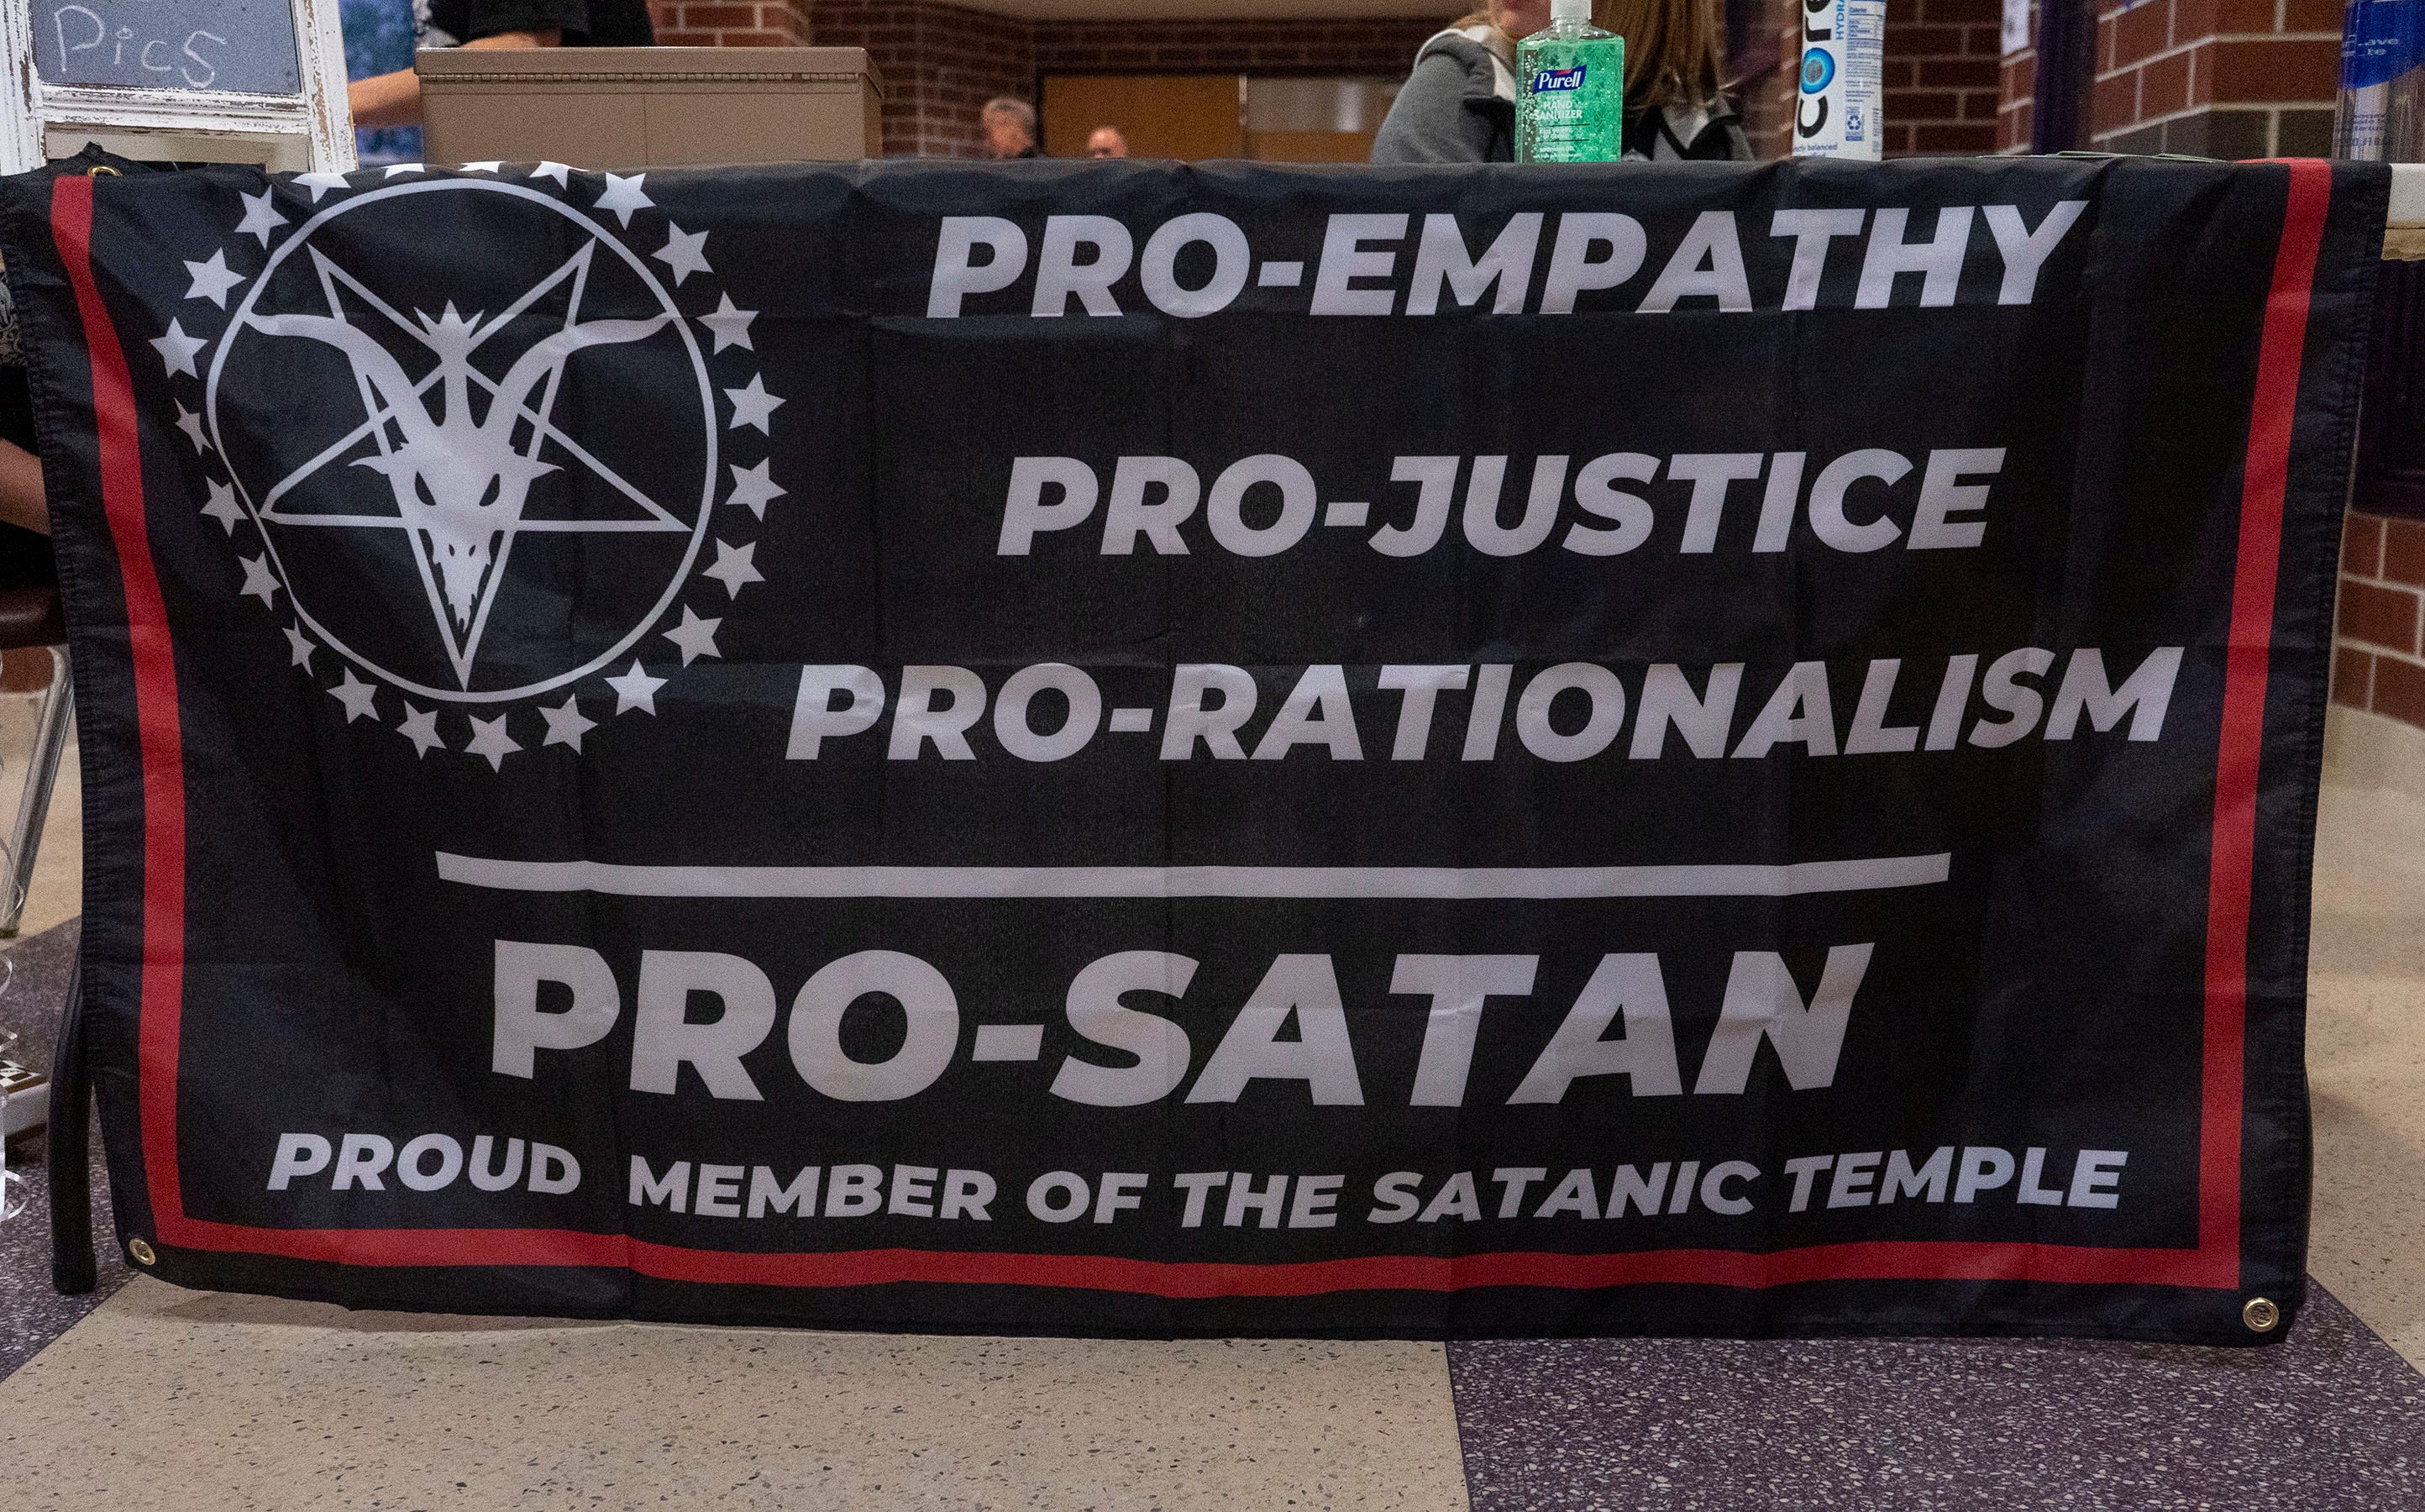 The Satanic Temple's back to school event at Northern High School in Dillsburg on Saturday, Sept. 24, 2022.